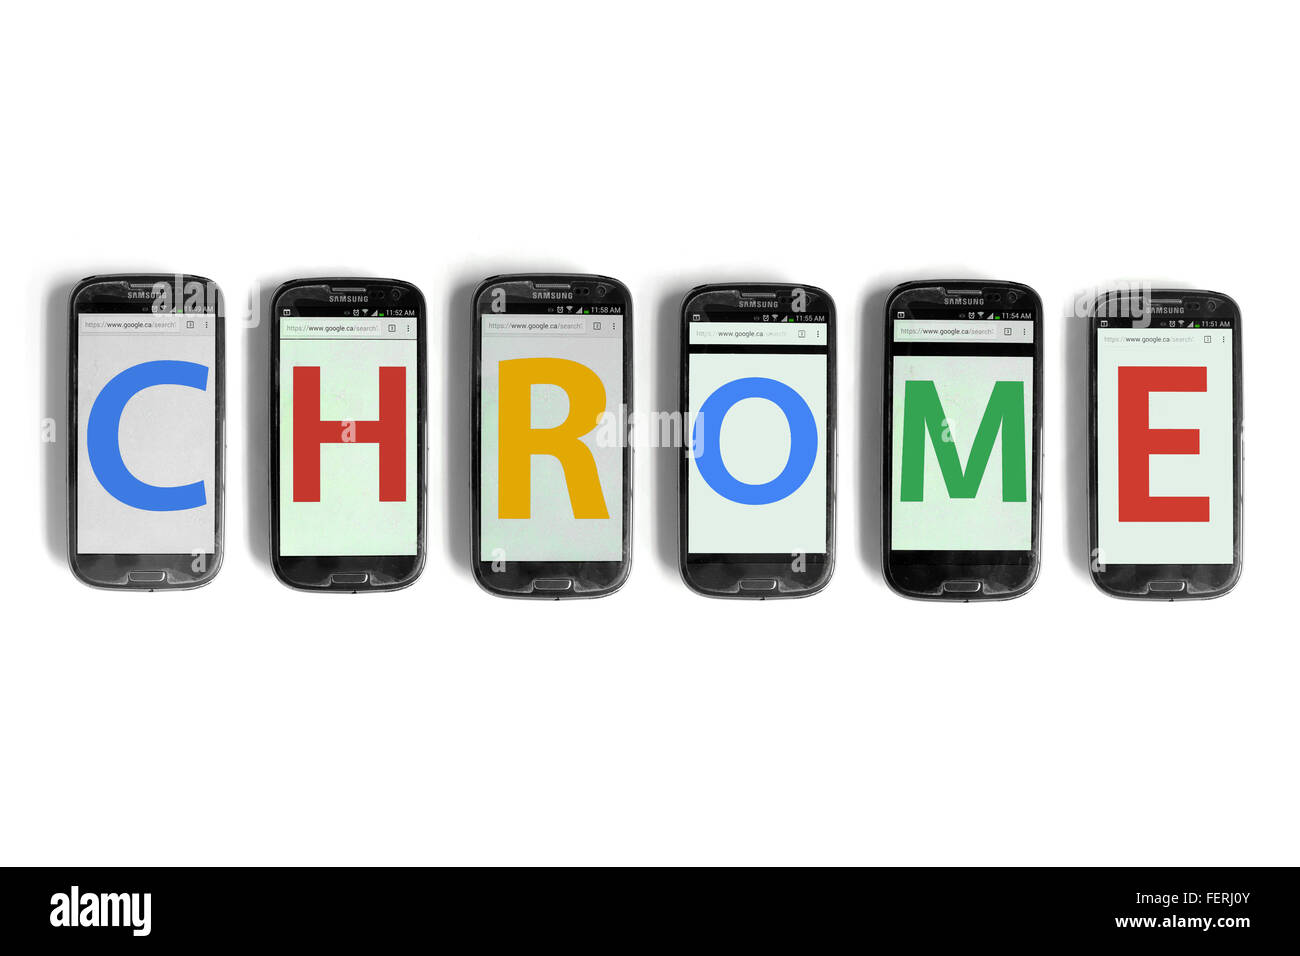 Chrome on the screens of smartphones photographed against a white background. Stock Photo